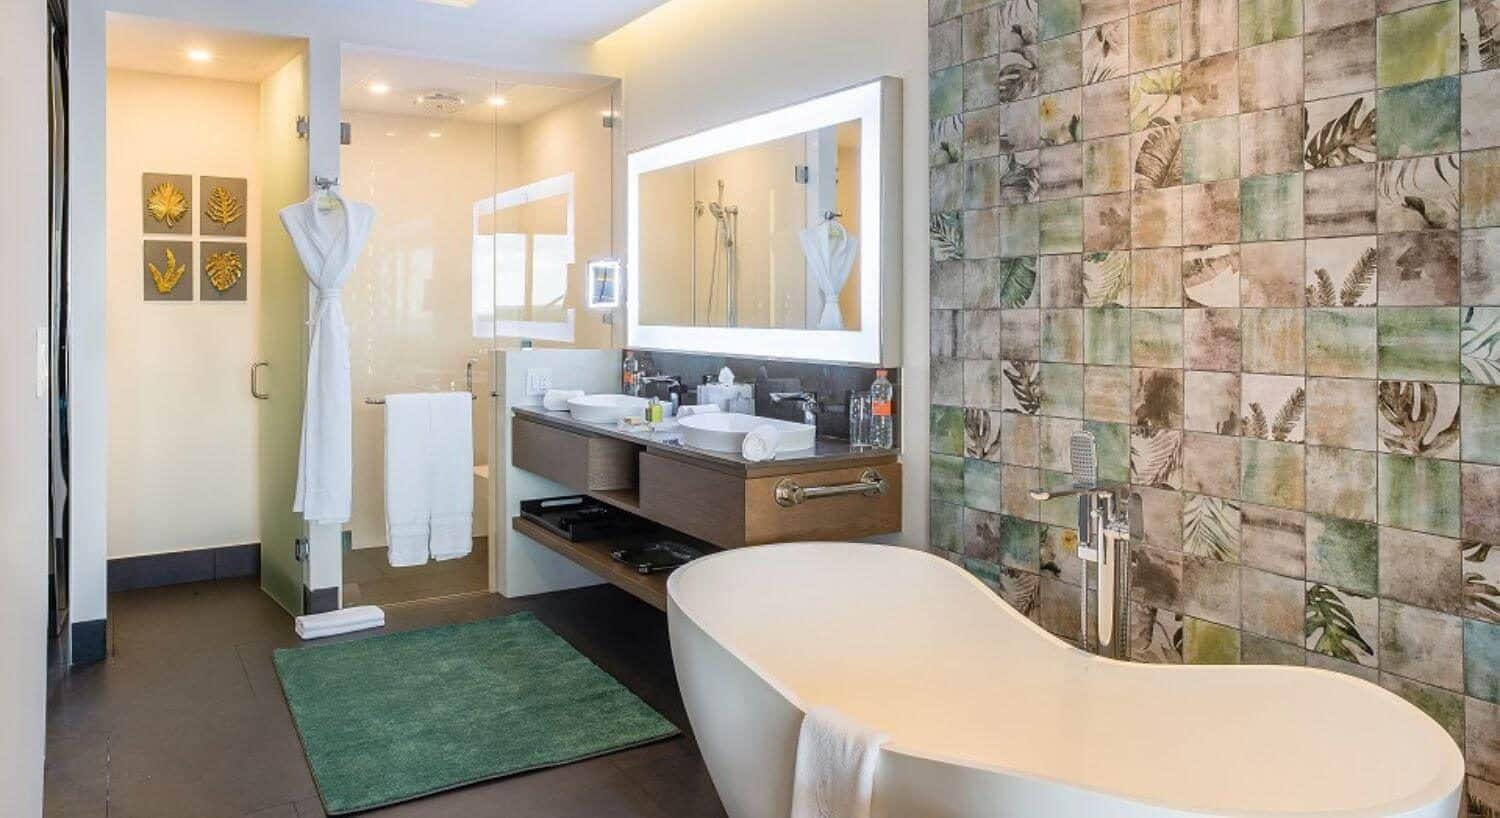 A bathroom with a deep soaking tub, double sink vanity with large lit mirror, and a shower with white robe and towels hanging by it.